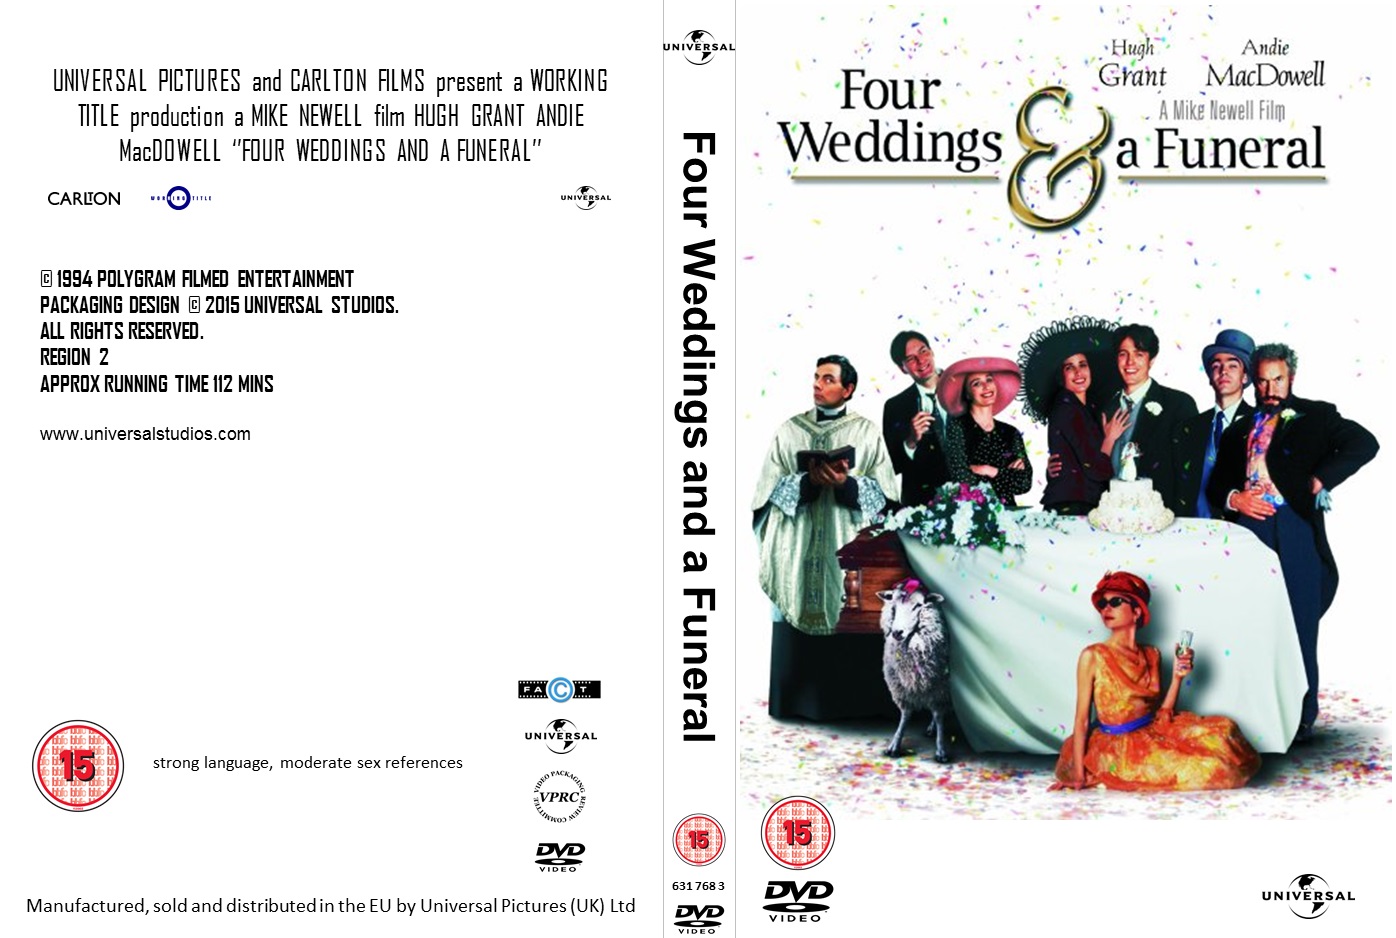 Four Weddings and a Funeral (2015, UK Retail Homemade DVD) | VHS and DVD Covers Wikia ...1396 x 938